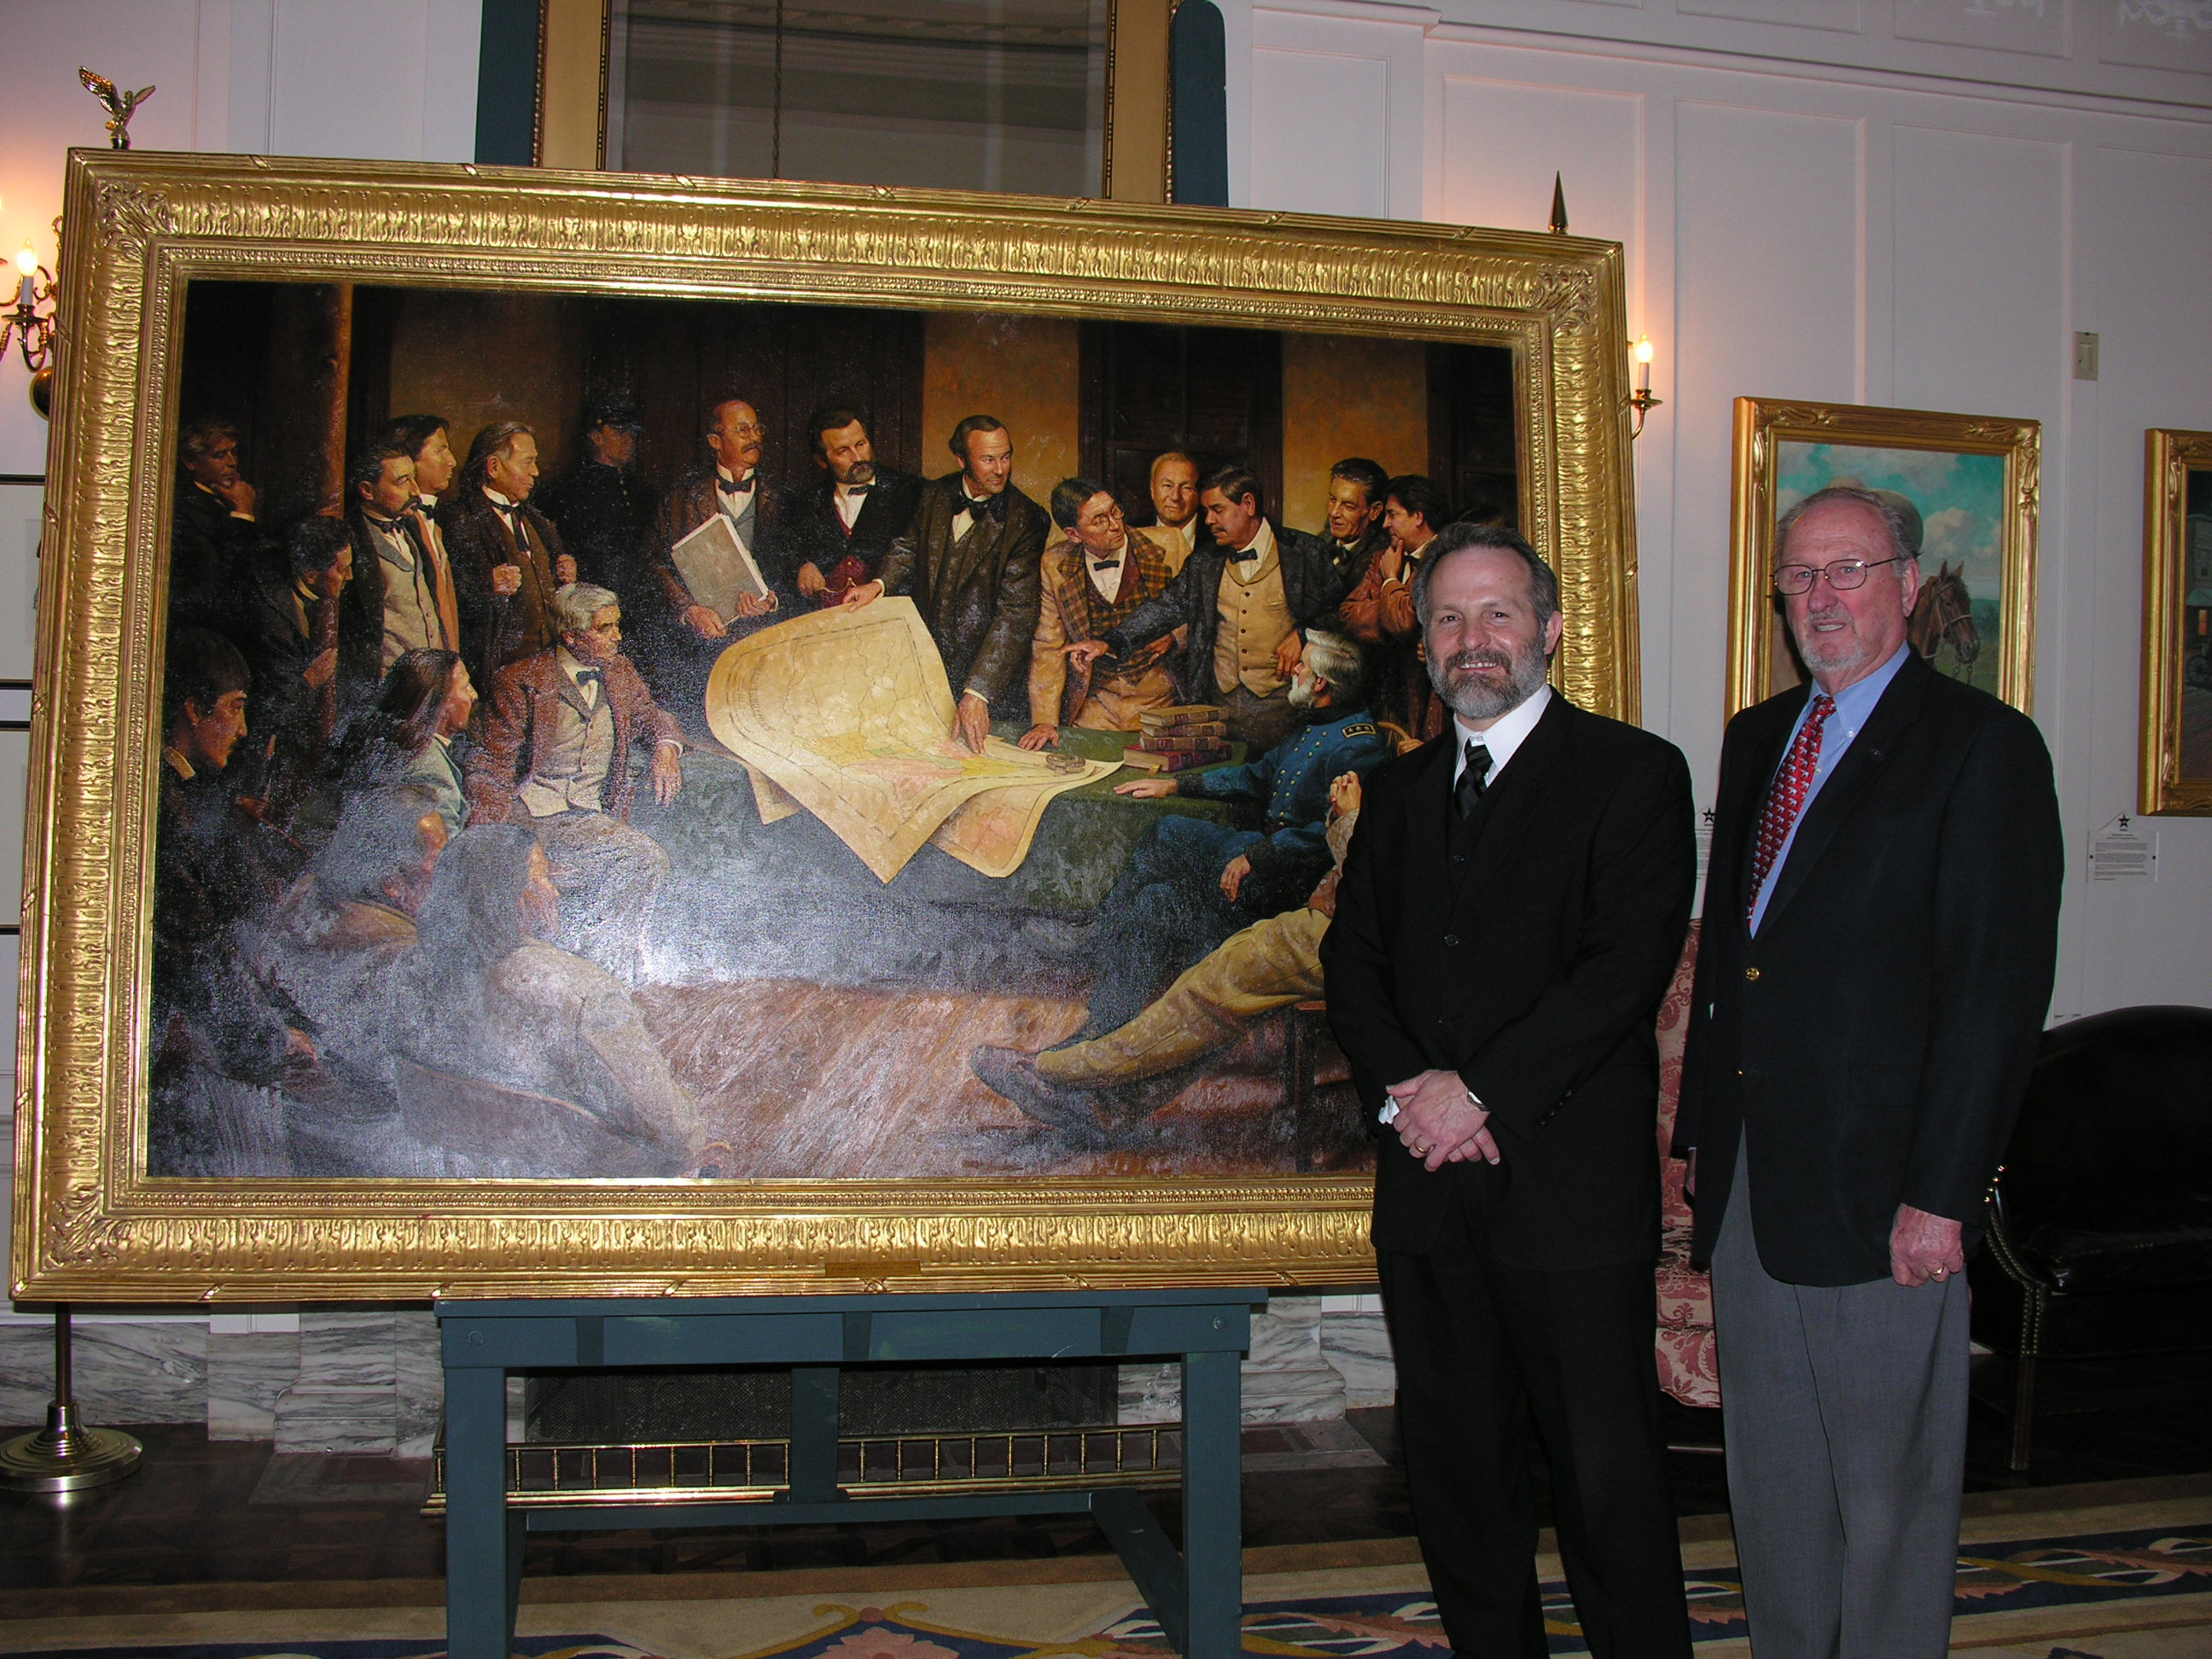 Artist Mike Wimmer and Charles Ford, President of the Oklahoma State Senate Historical Preservation Fund, unveiled "Fort Smith Council 1865" at the Capitol.